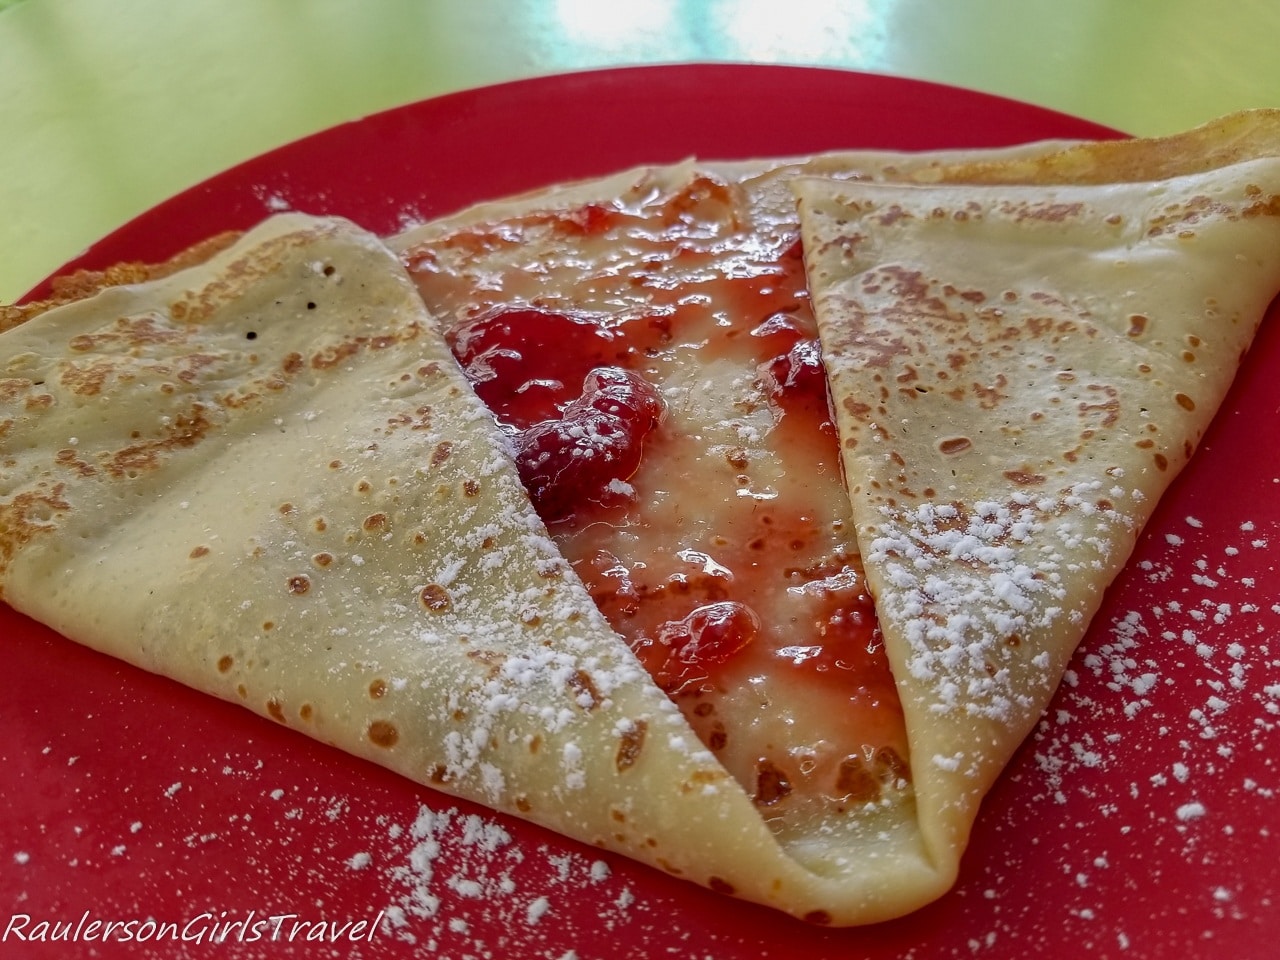 Strawberry Crepe in Nice